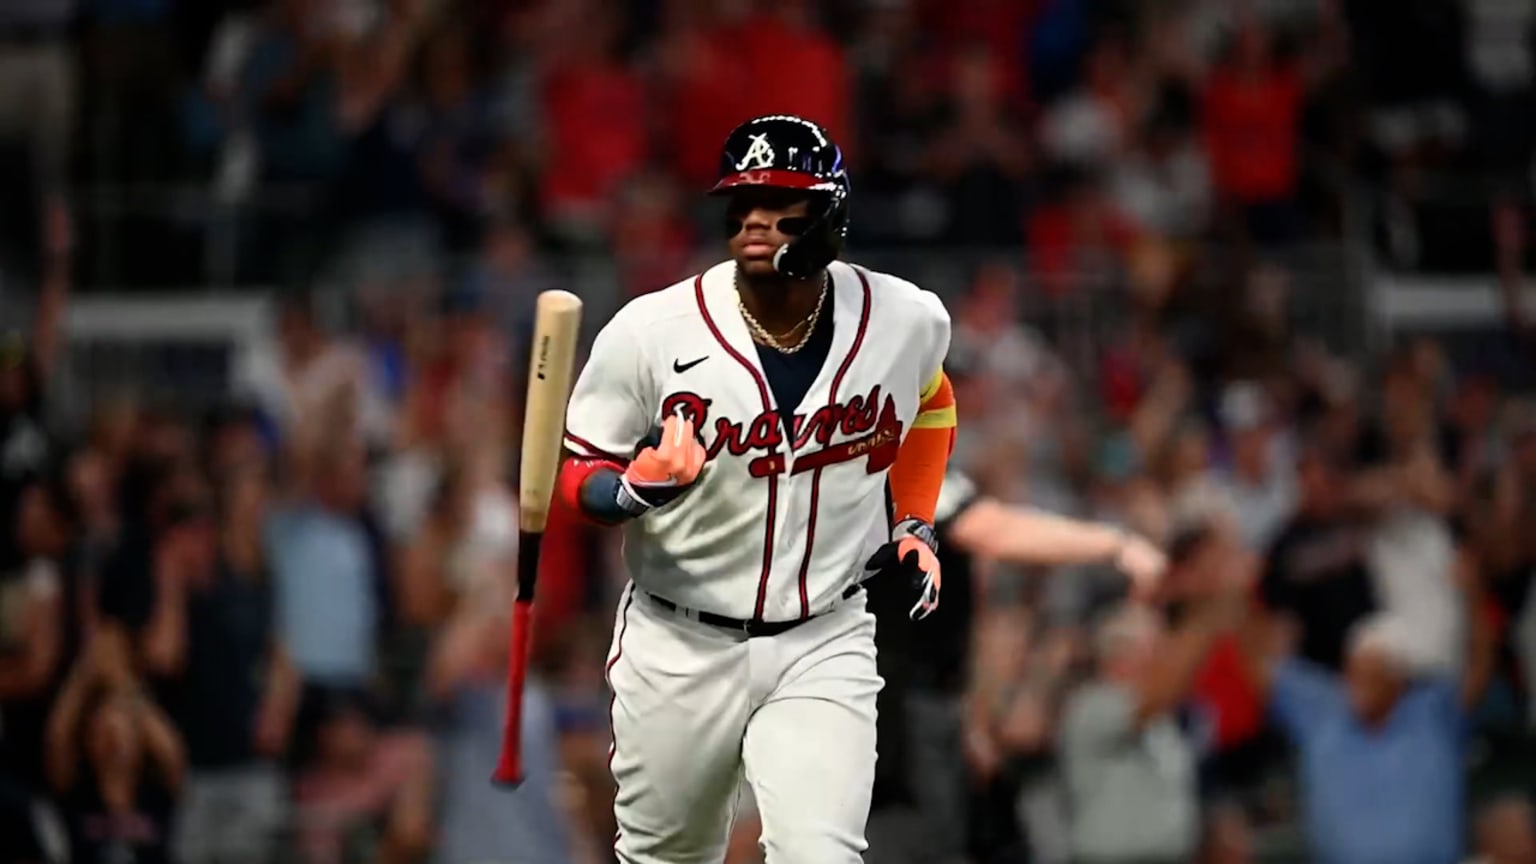 Ronald Acuña Jr. is the No. 1 Player Right Now